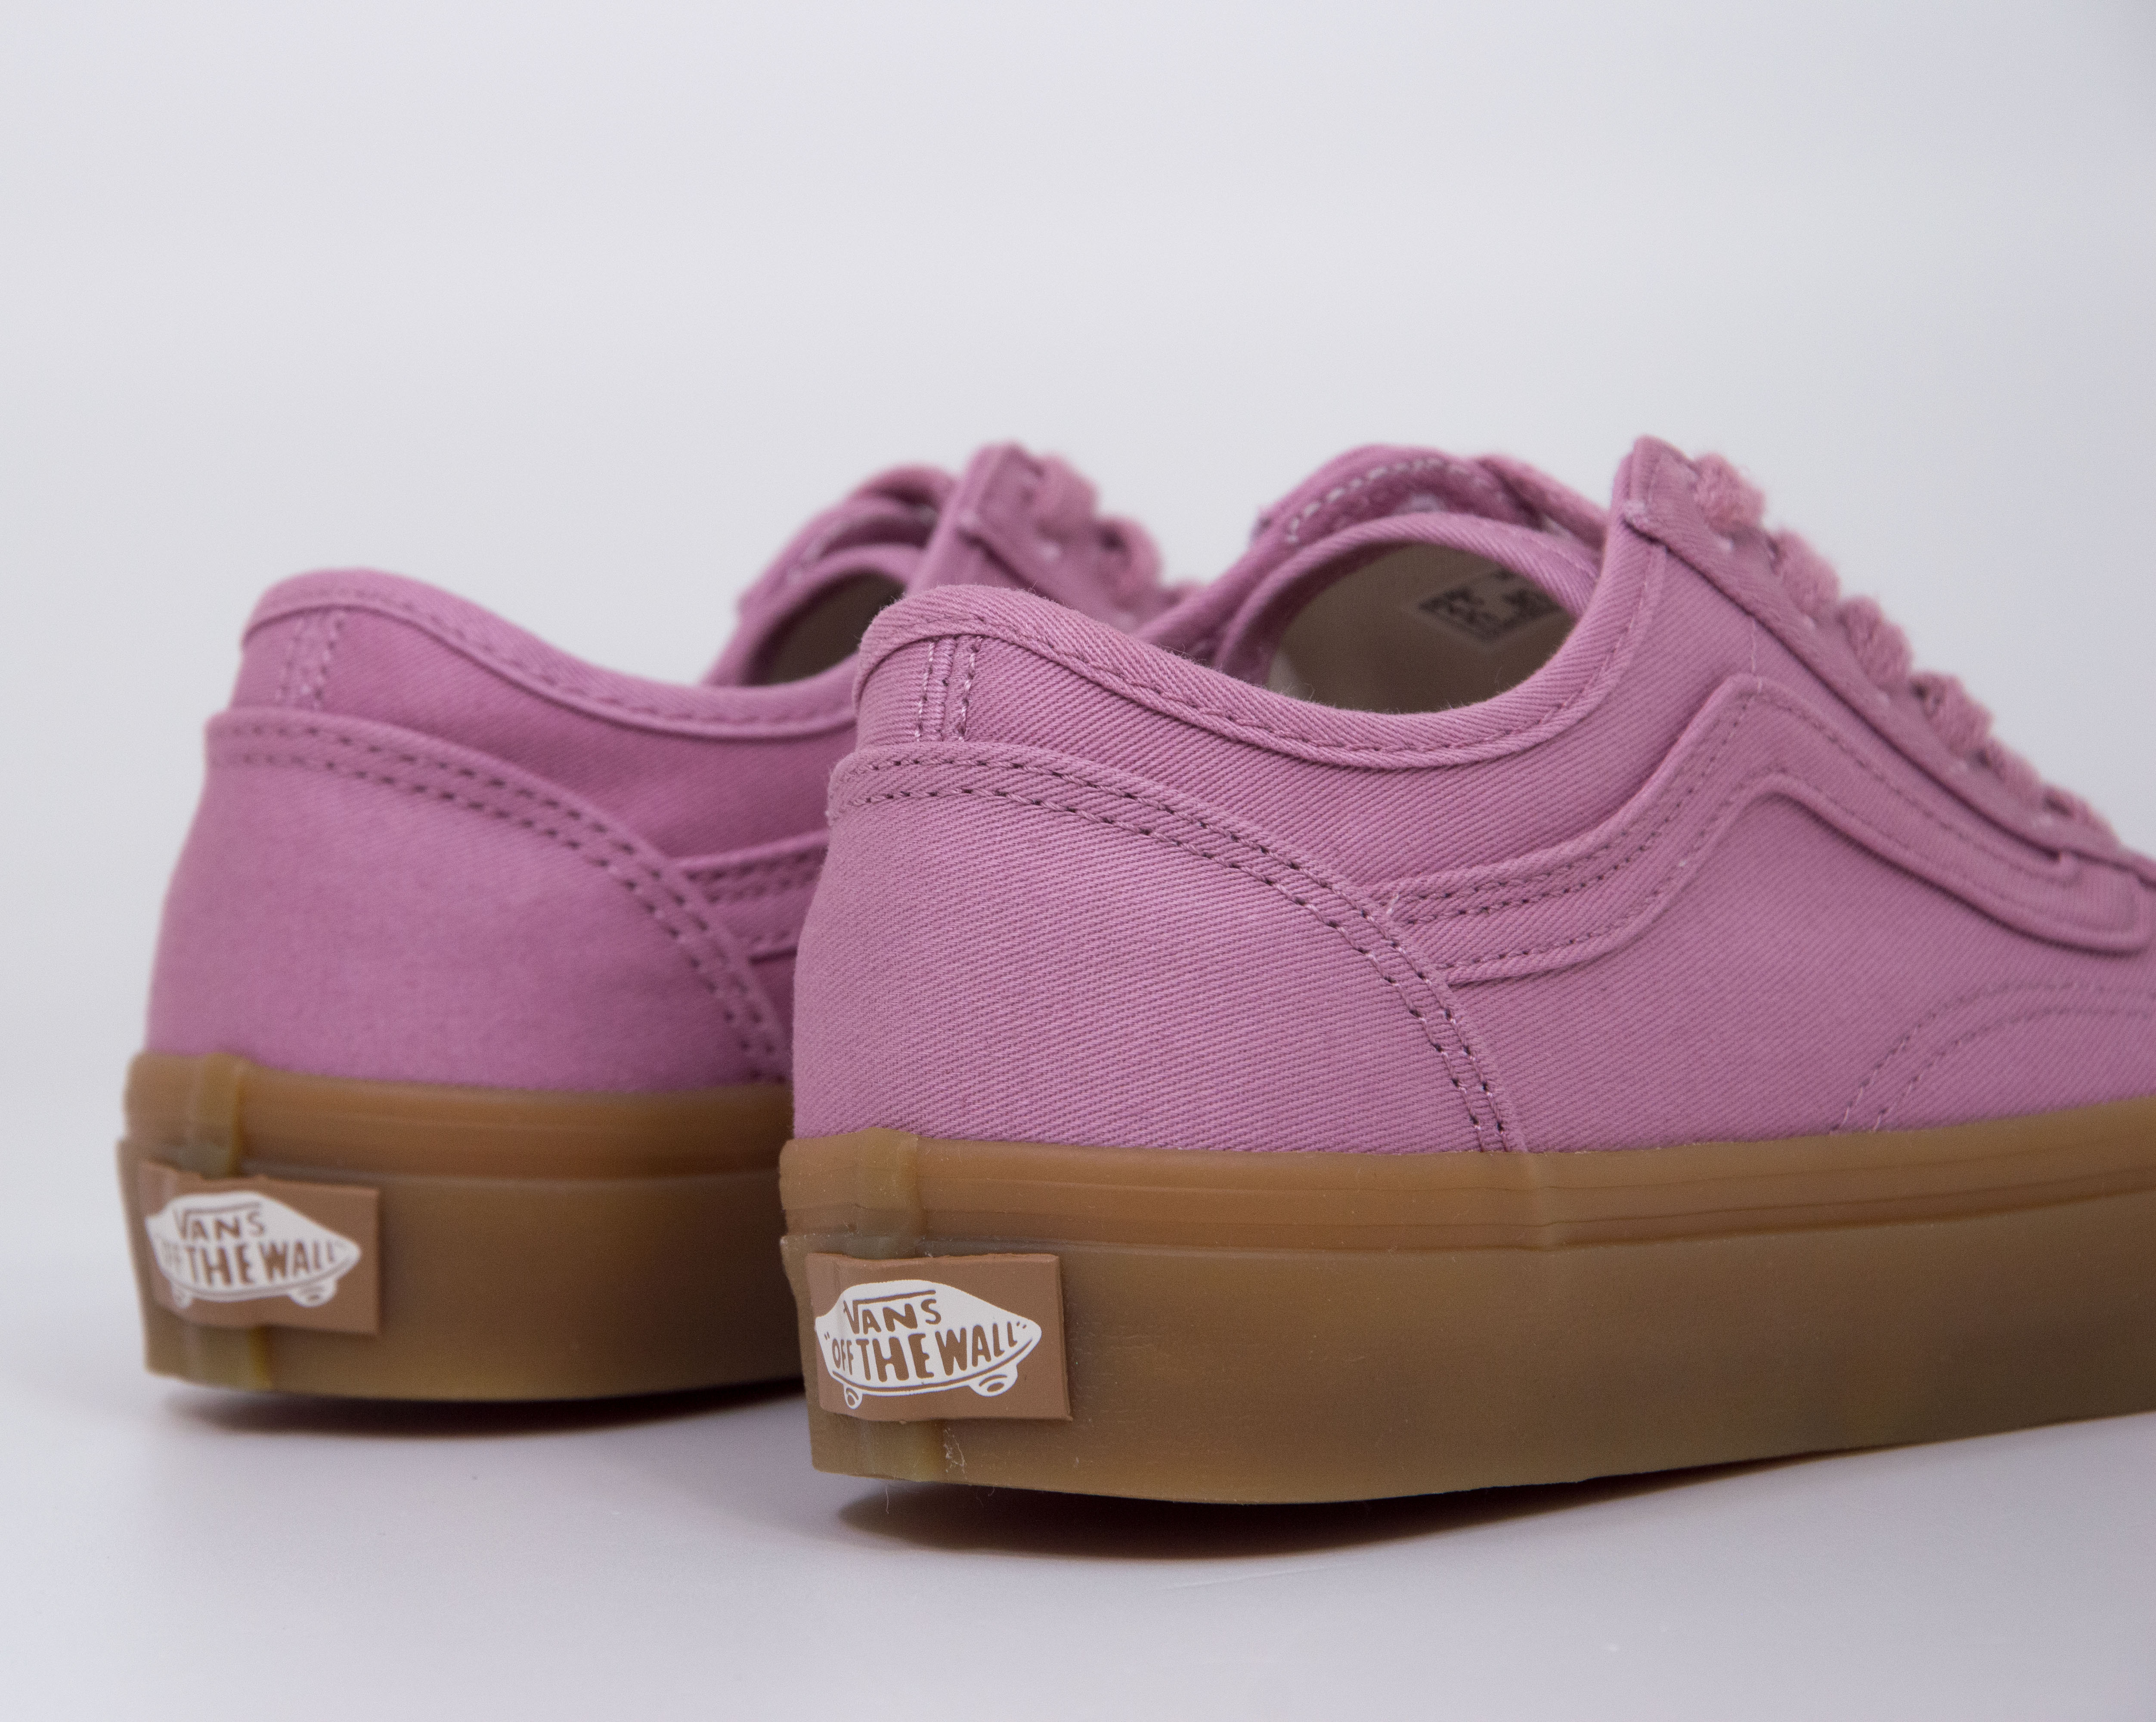 Vans - OLD SKOOL TAPERED - (Eco Theory in Our Hands) Lilas/Gum